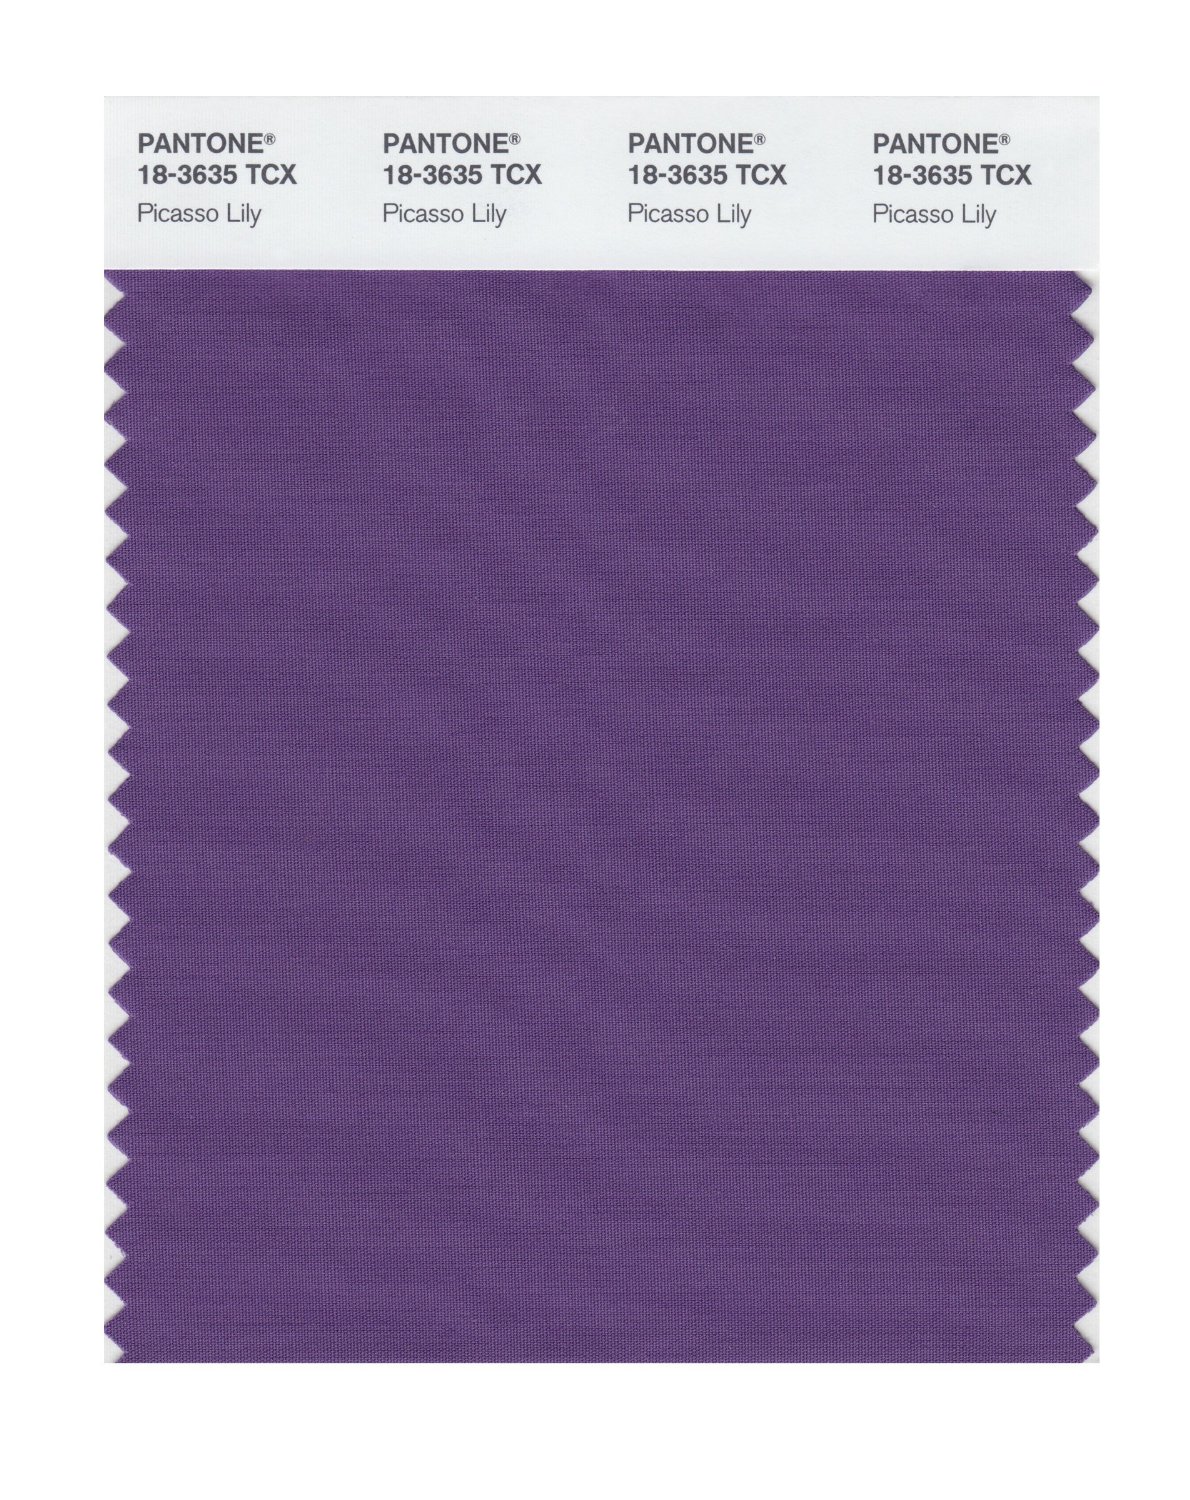 Pantone Cotton Swatch 18-3635 Picasso Lily